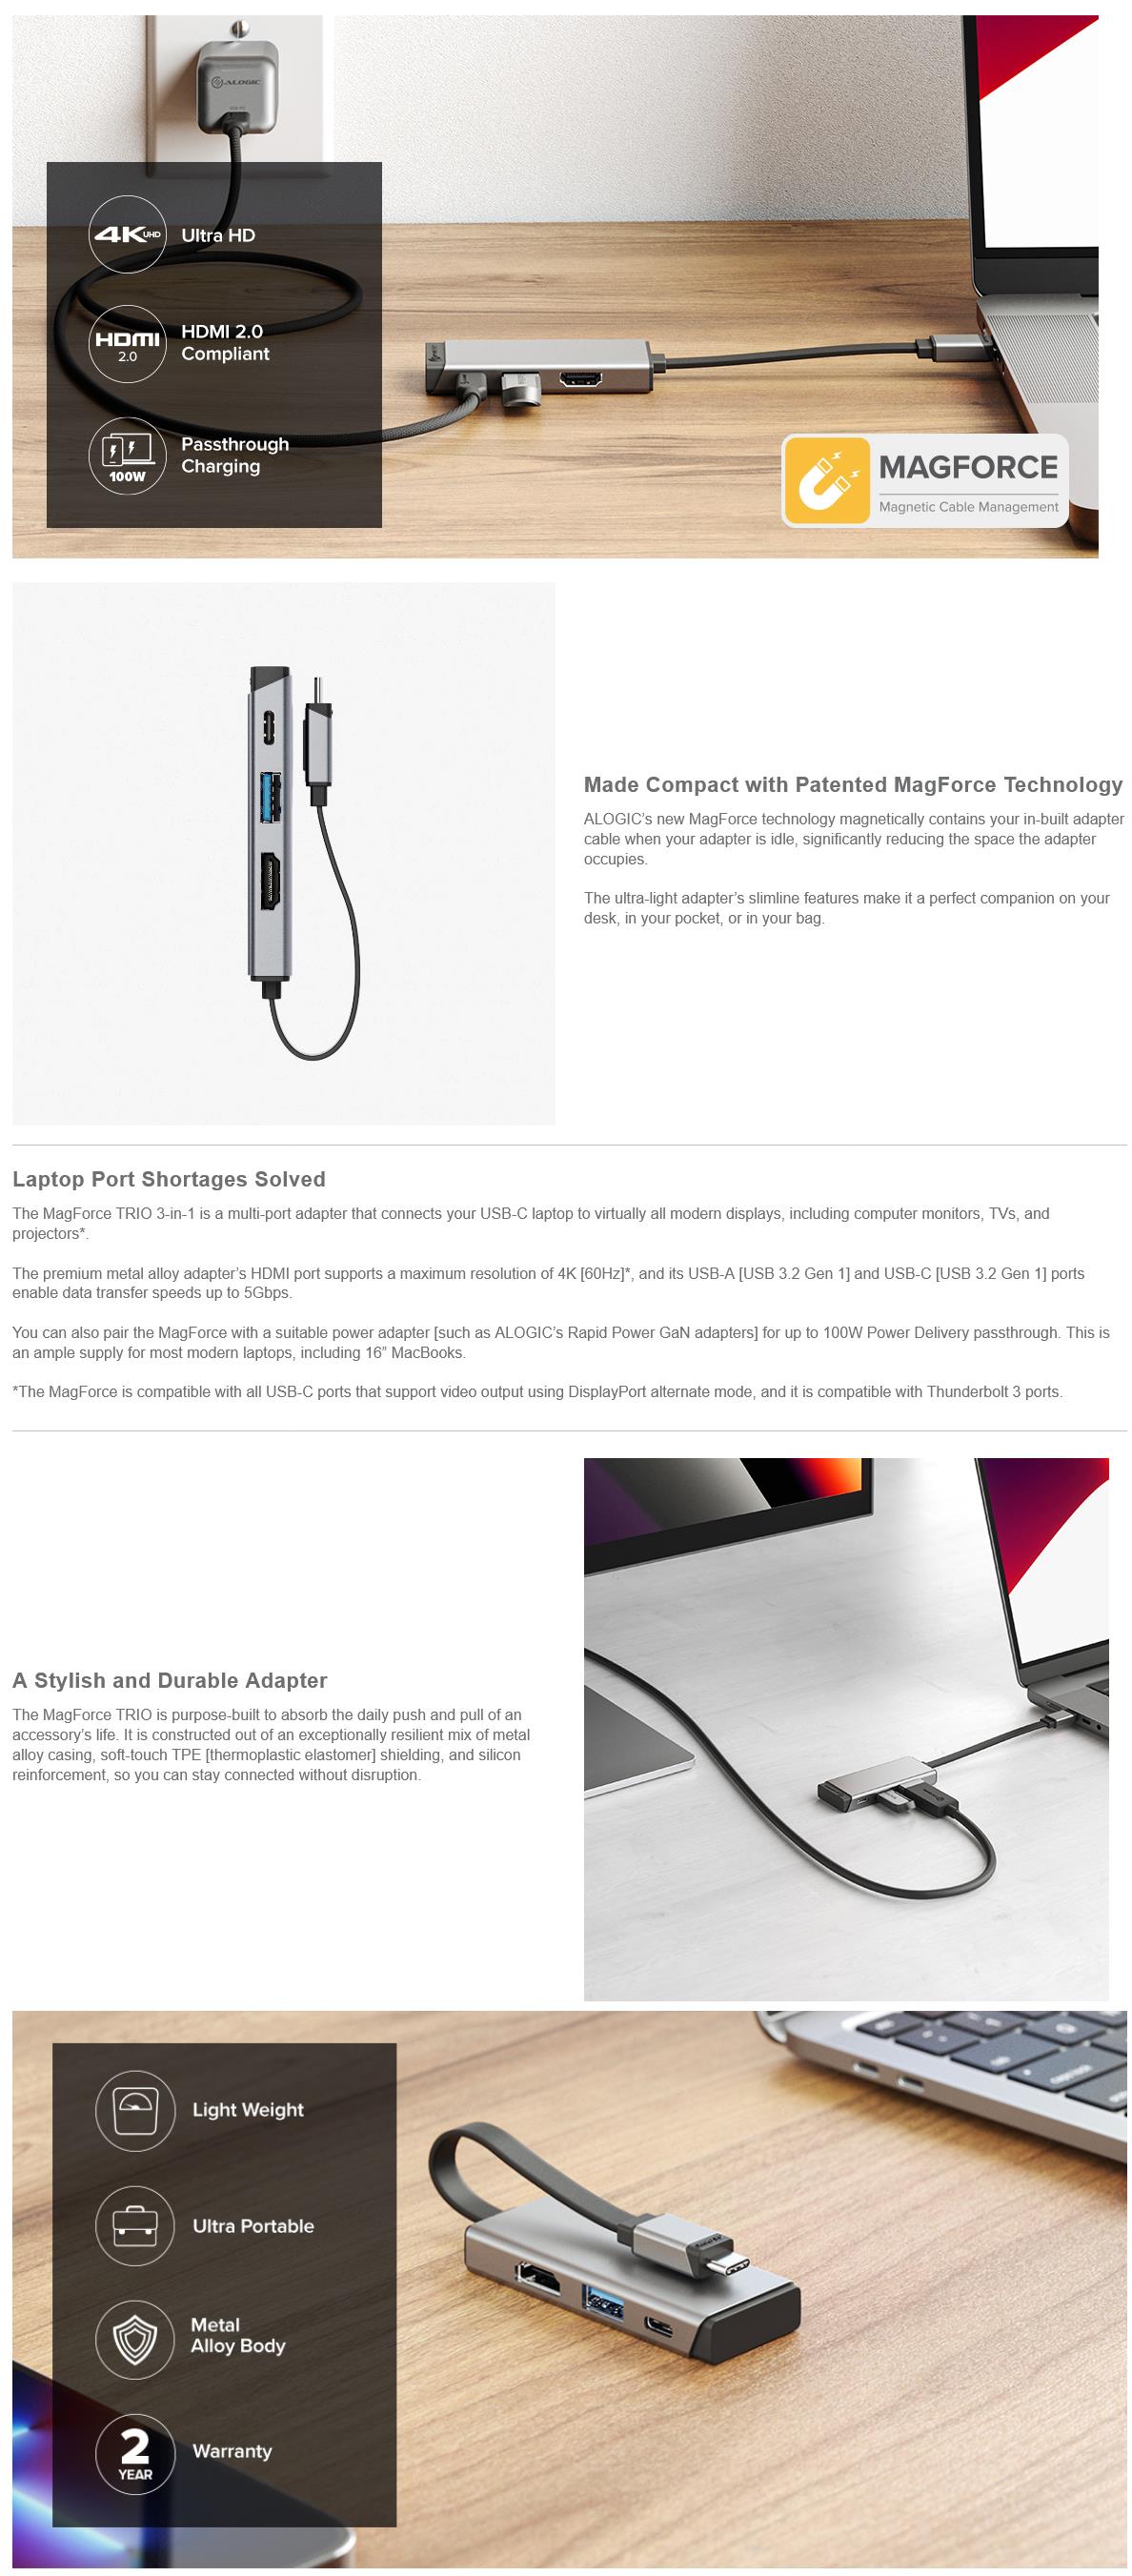 A large marketing image providing additional information about the product ALOGIC Magforce Trio 4k USB-C HDMI Hub with 100w Passthrough - Additional alt info not provided